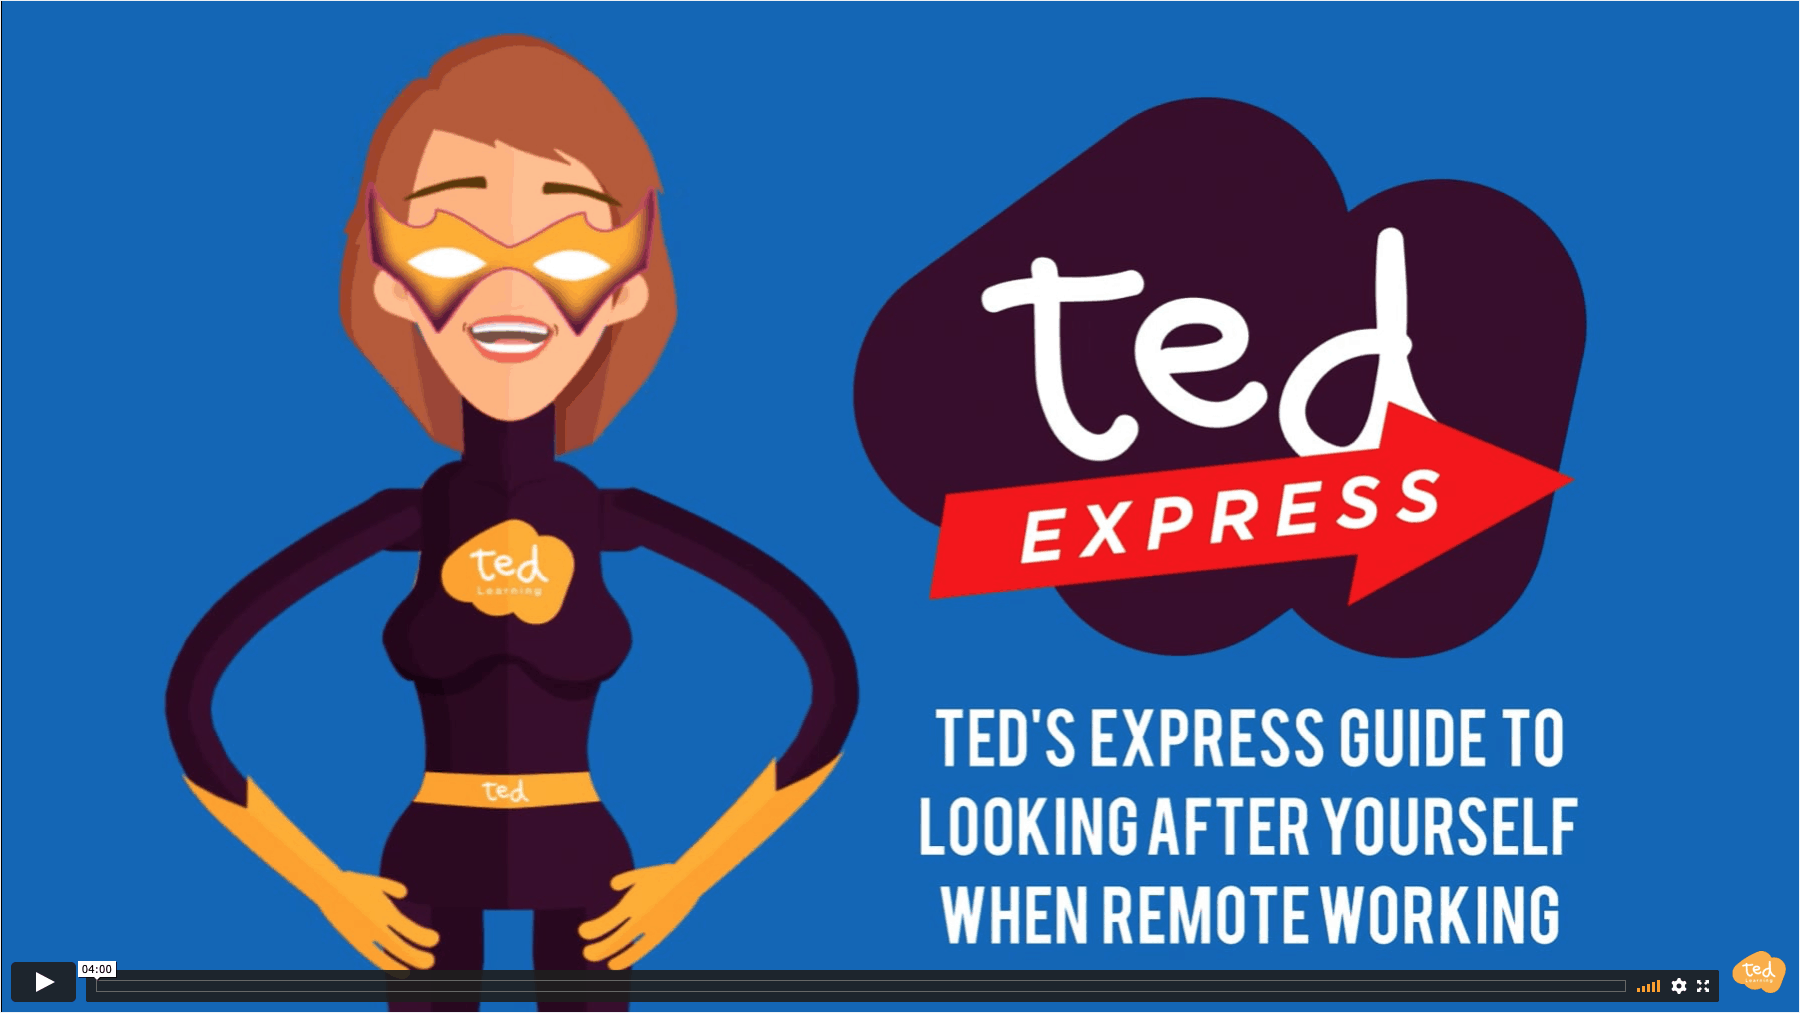 remote working online course ted learning